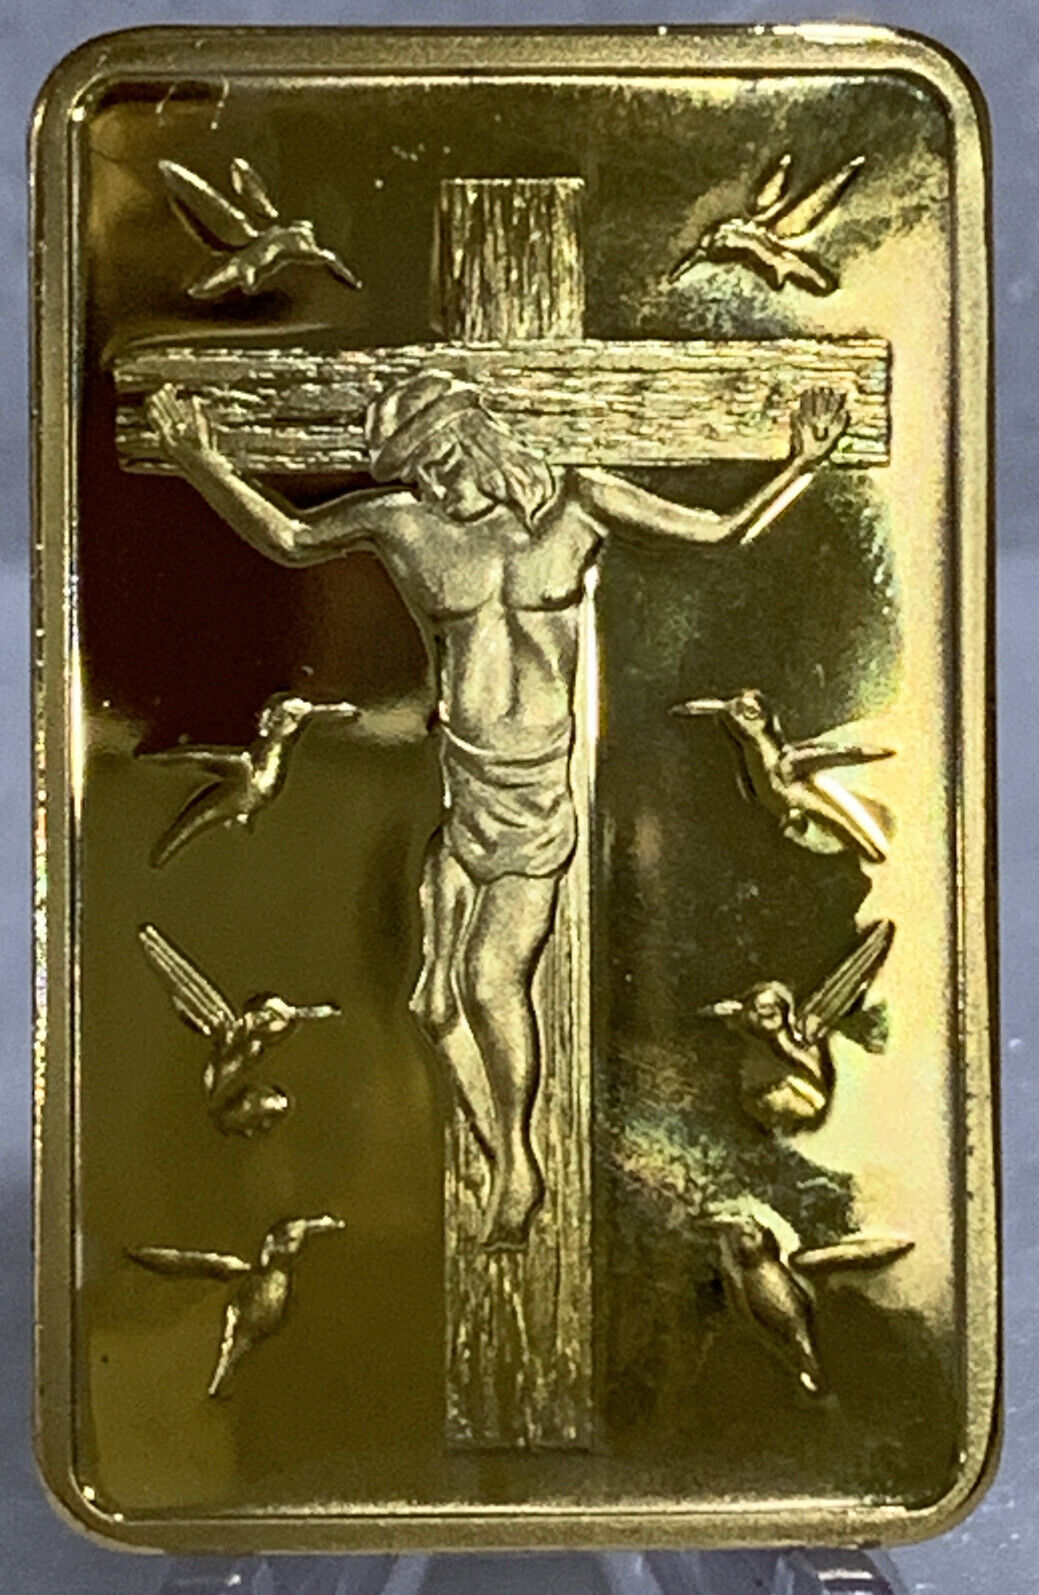 * 25 Pieces Of JesusChrist Crucified & 10 Commandments Gold Metal Bar In Capsule